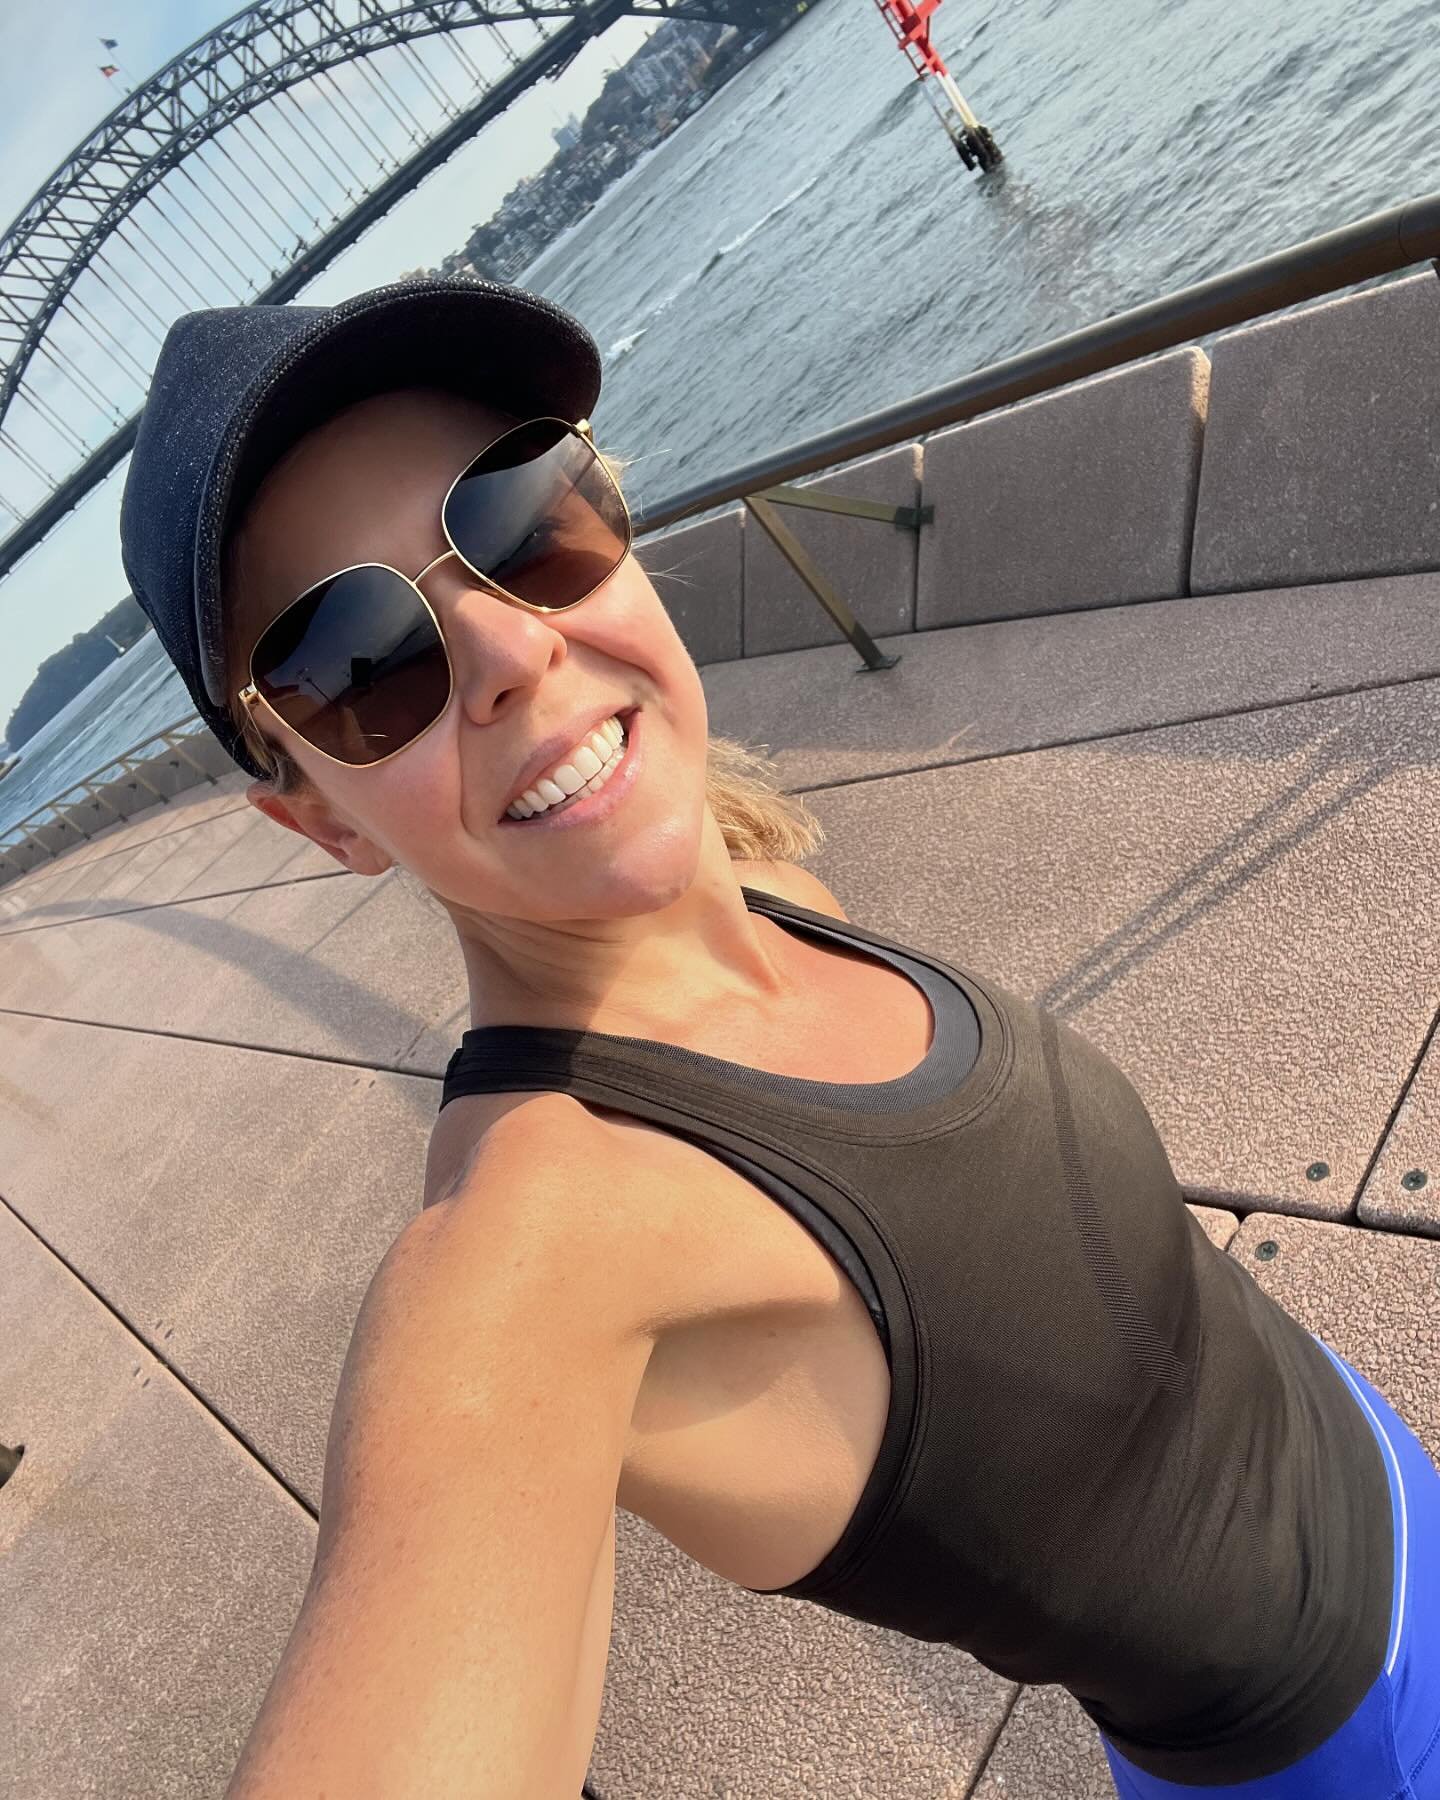 Lovely little run around the Opera House this morning! 🏃🏼&zwj;♀️🇦🇺 Am back in a couple of weeks, will never get sick of this view 💙

#sydney #operahouse #sydneyoperahouse #running